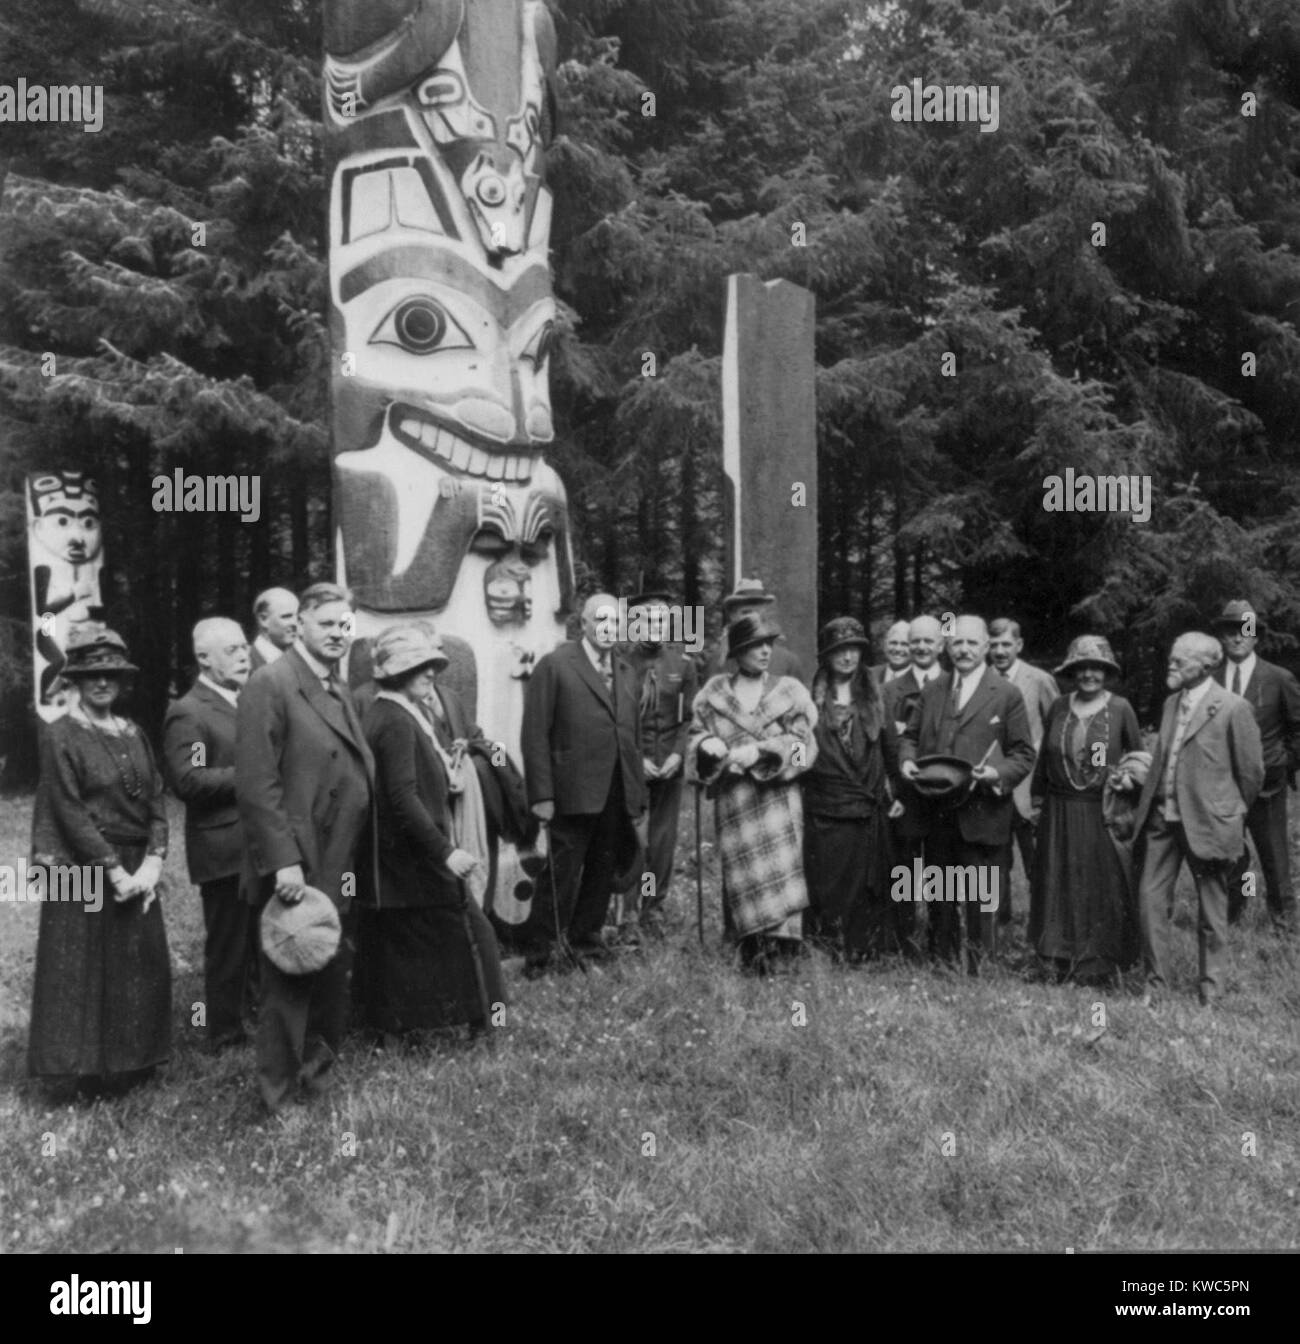 President Warren Harding and his Alaska party at the Great Alaskan Totem Pole at Sitka. July 1923. First Lady Florence Harding wears a bold plaid coat. Herbert Hoover is 4th from left. (BSLOC 2015 15 79) Stock Photo